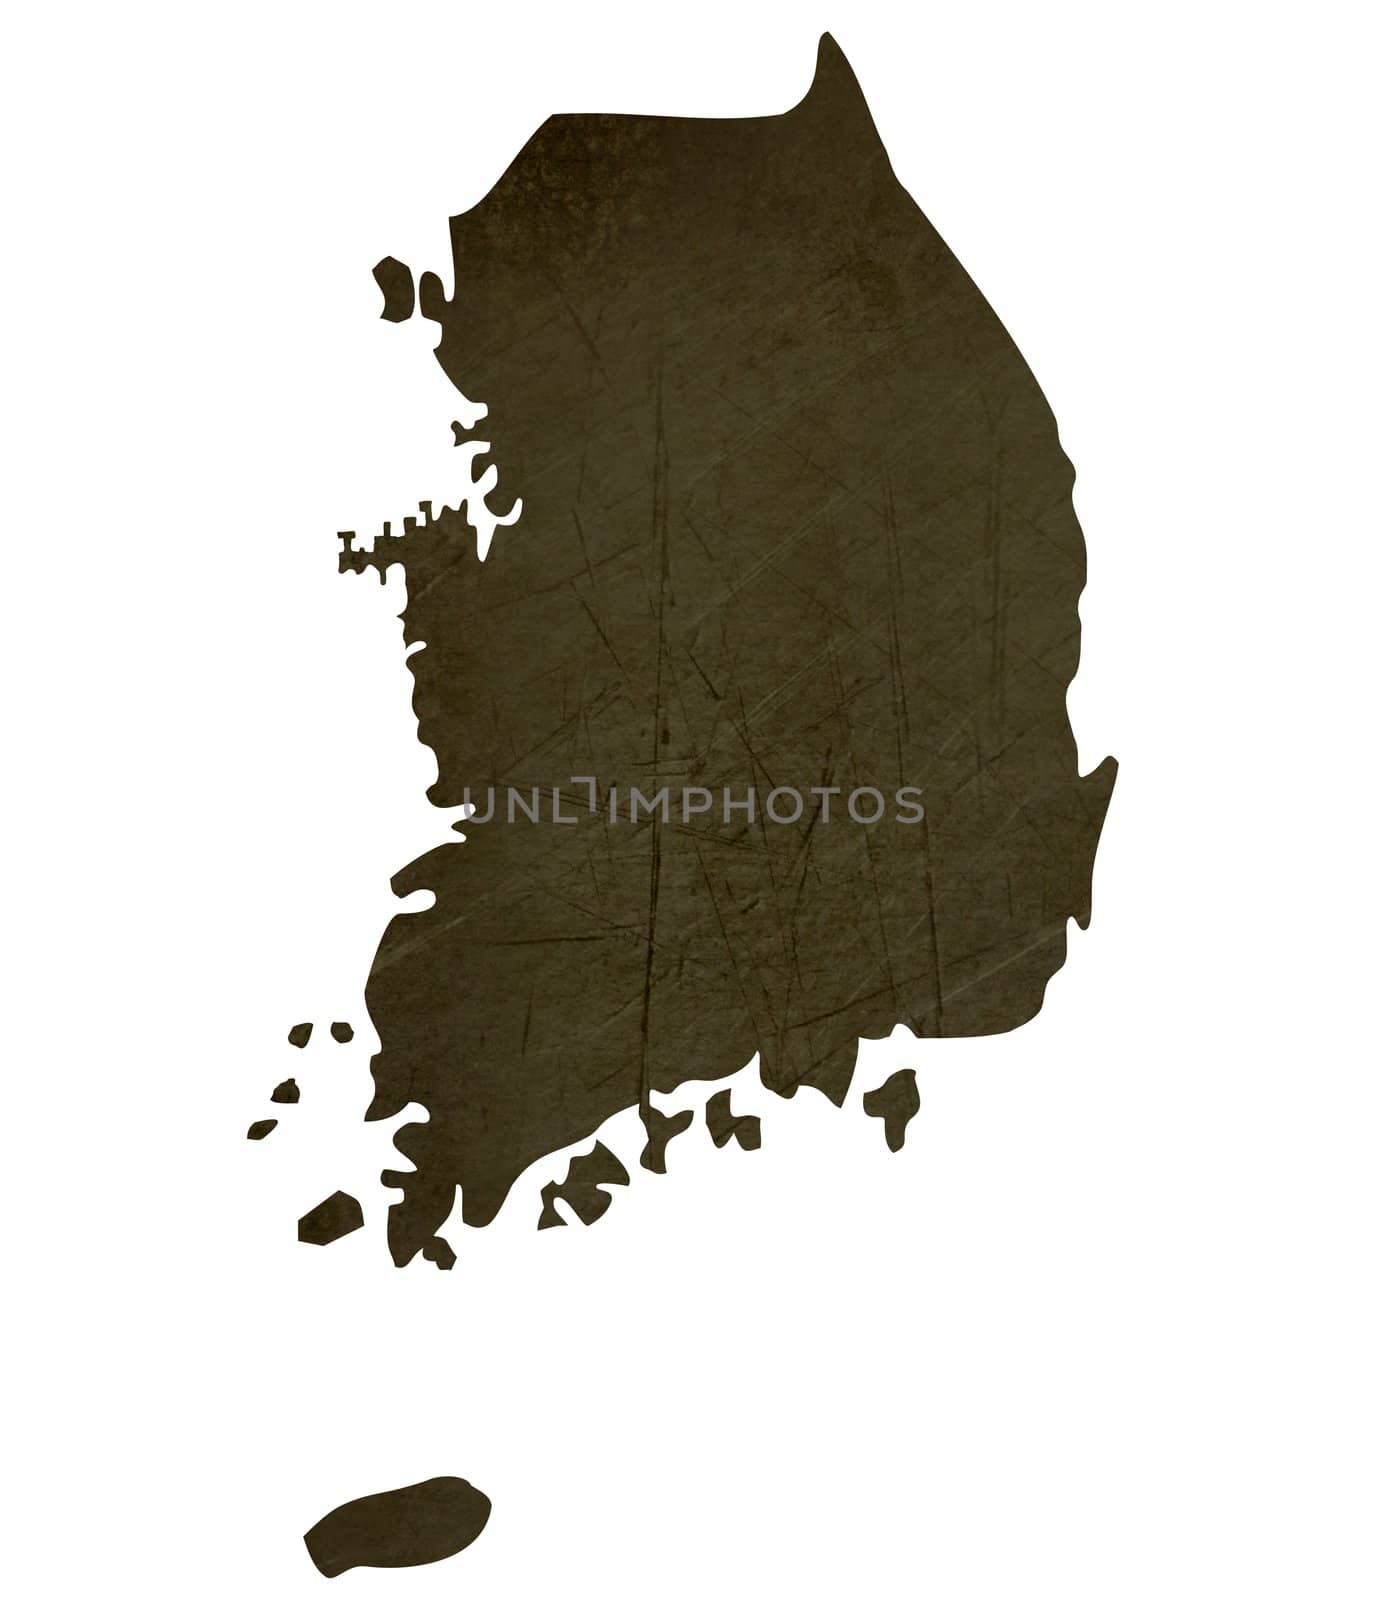 Dark silhouetted and textured map of South Korea isolated on white background.